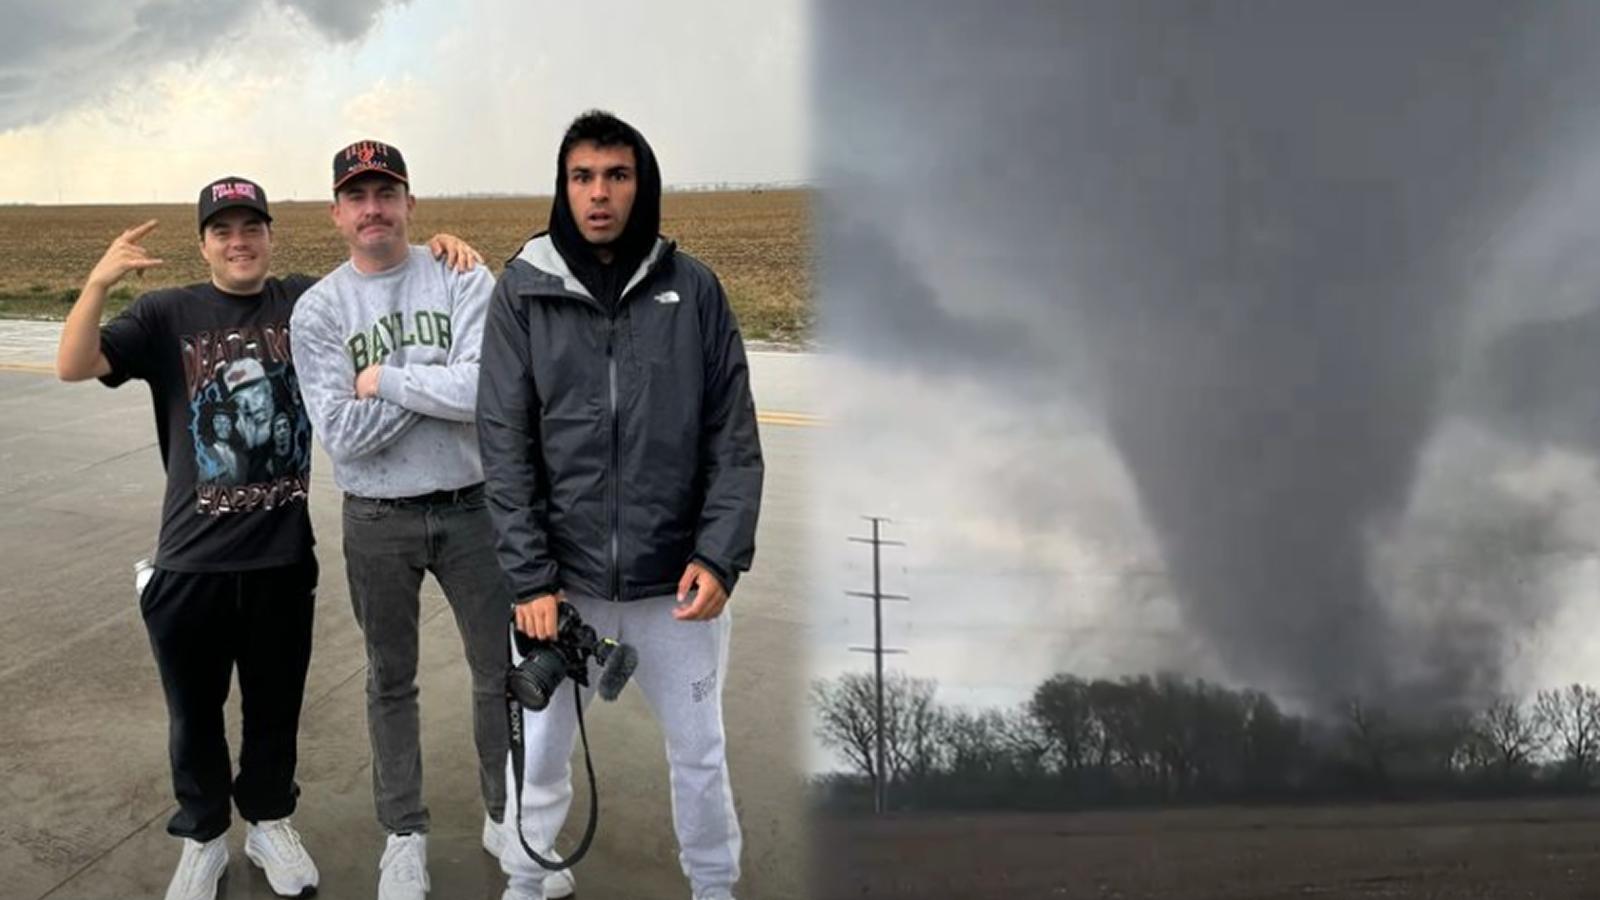 NELK boys tornado chasing, with the tornado they intercepted on the right